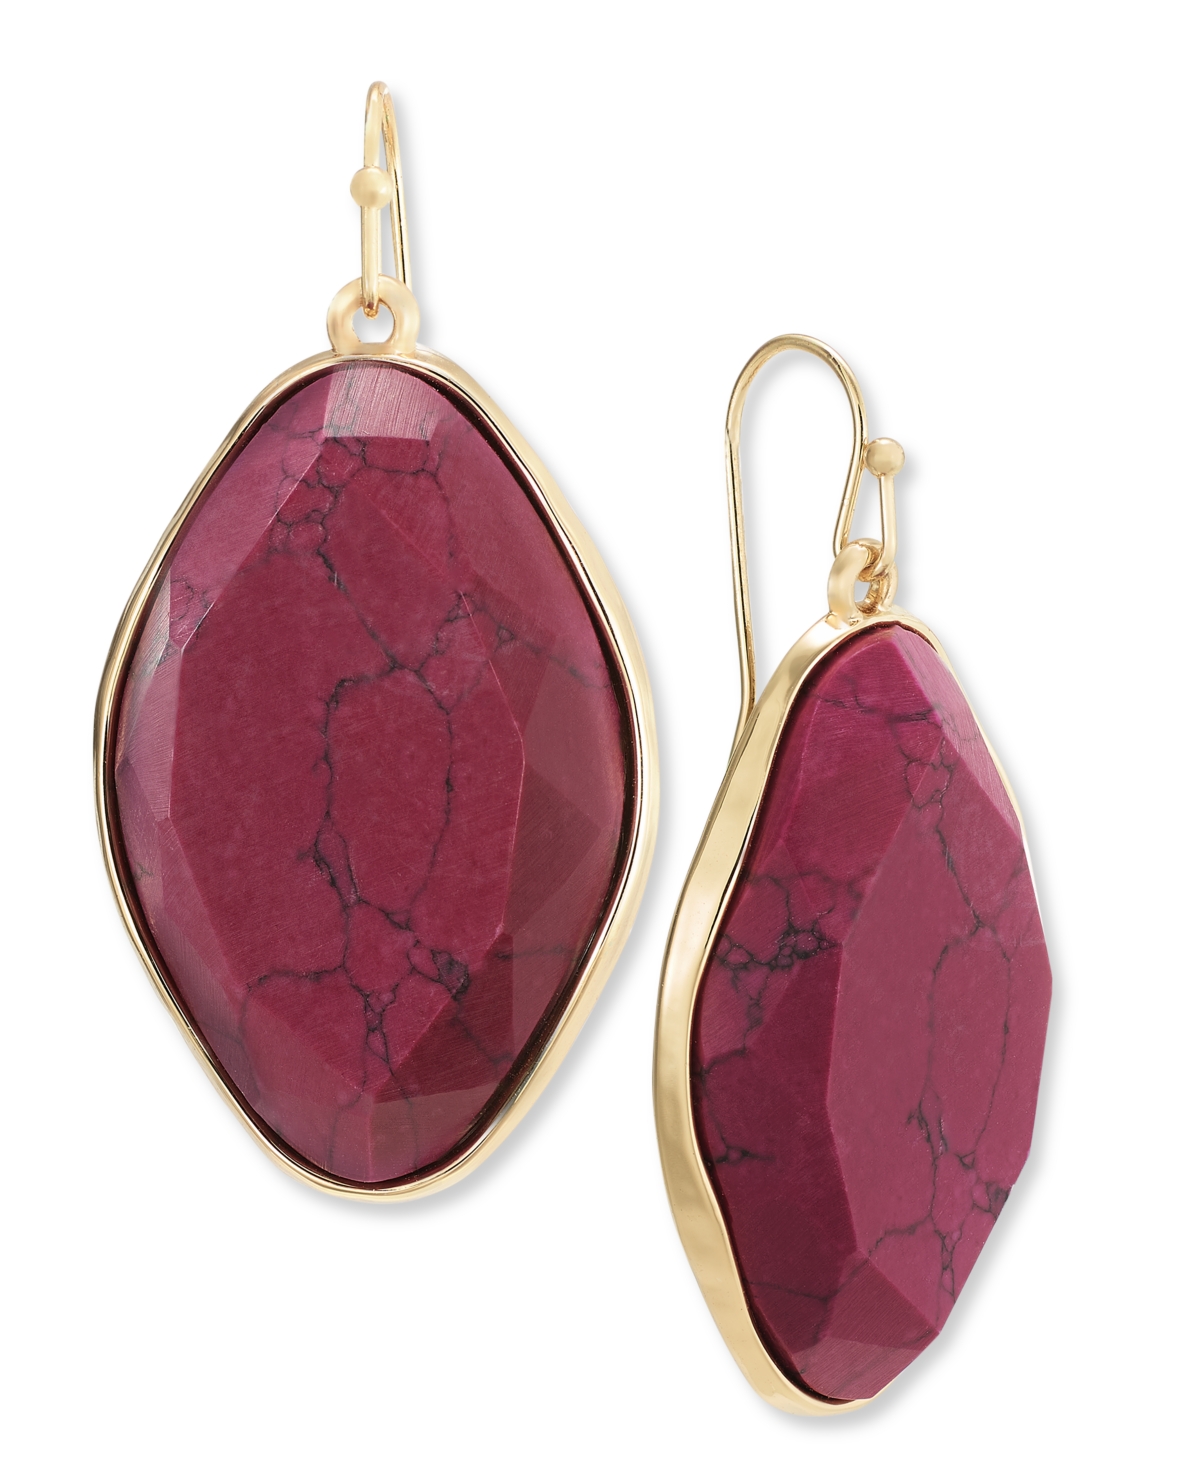 Oval Color Stone Drop Earrings, Created for Macy's - Magenta